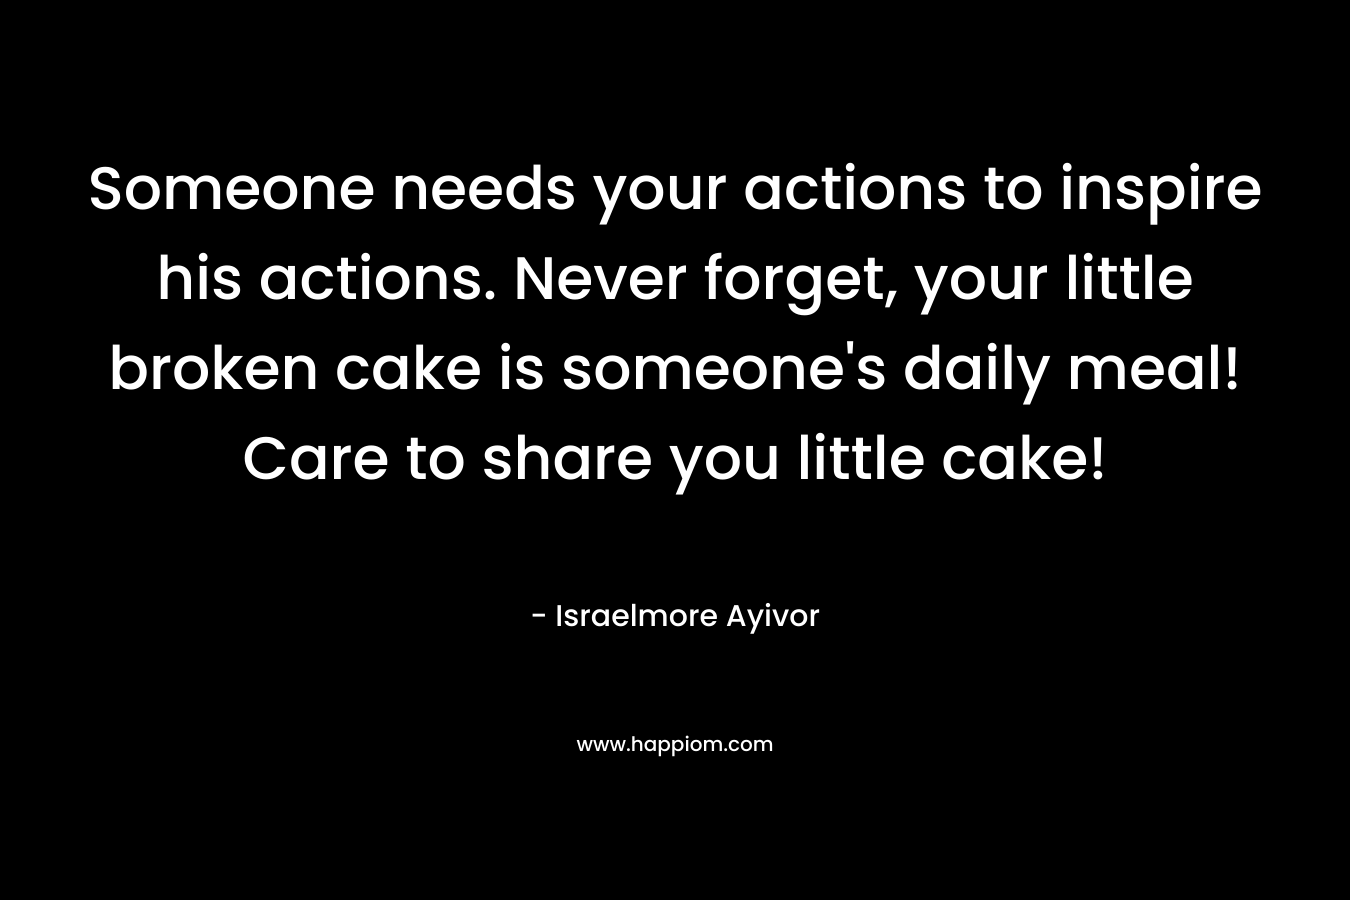 Someone needs your actions to inspire his actions. Never forget, your little broken cake is someone's daily meal! Care to share you little cake!